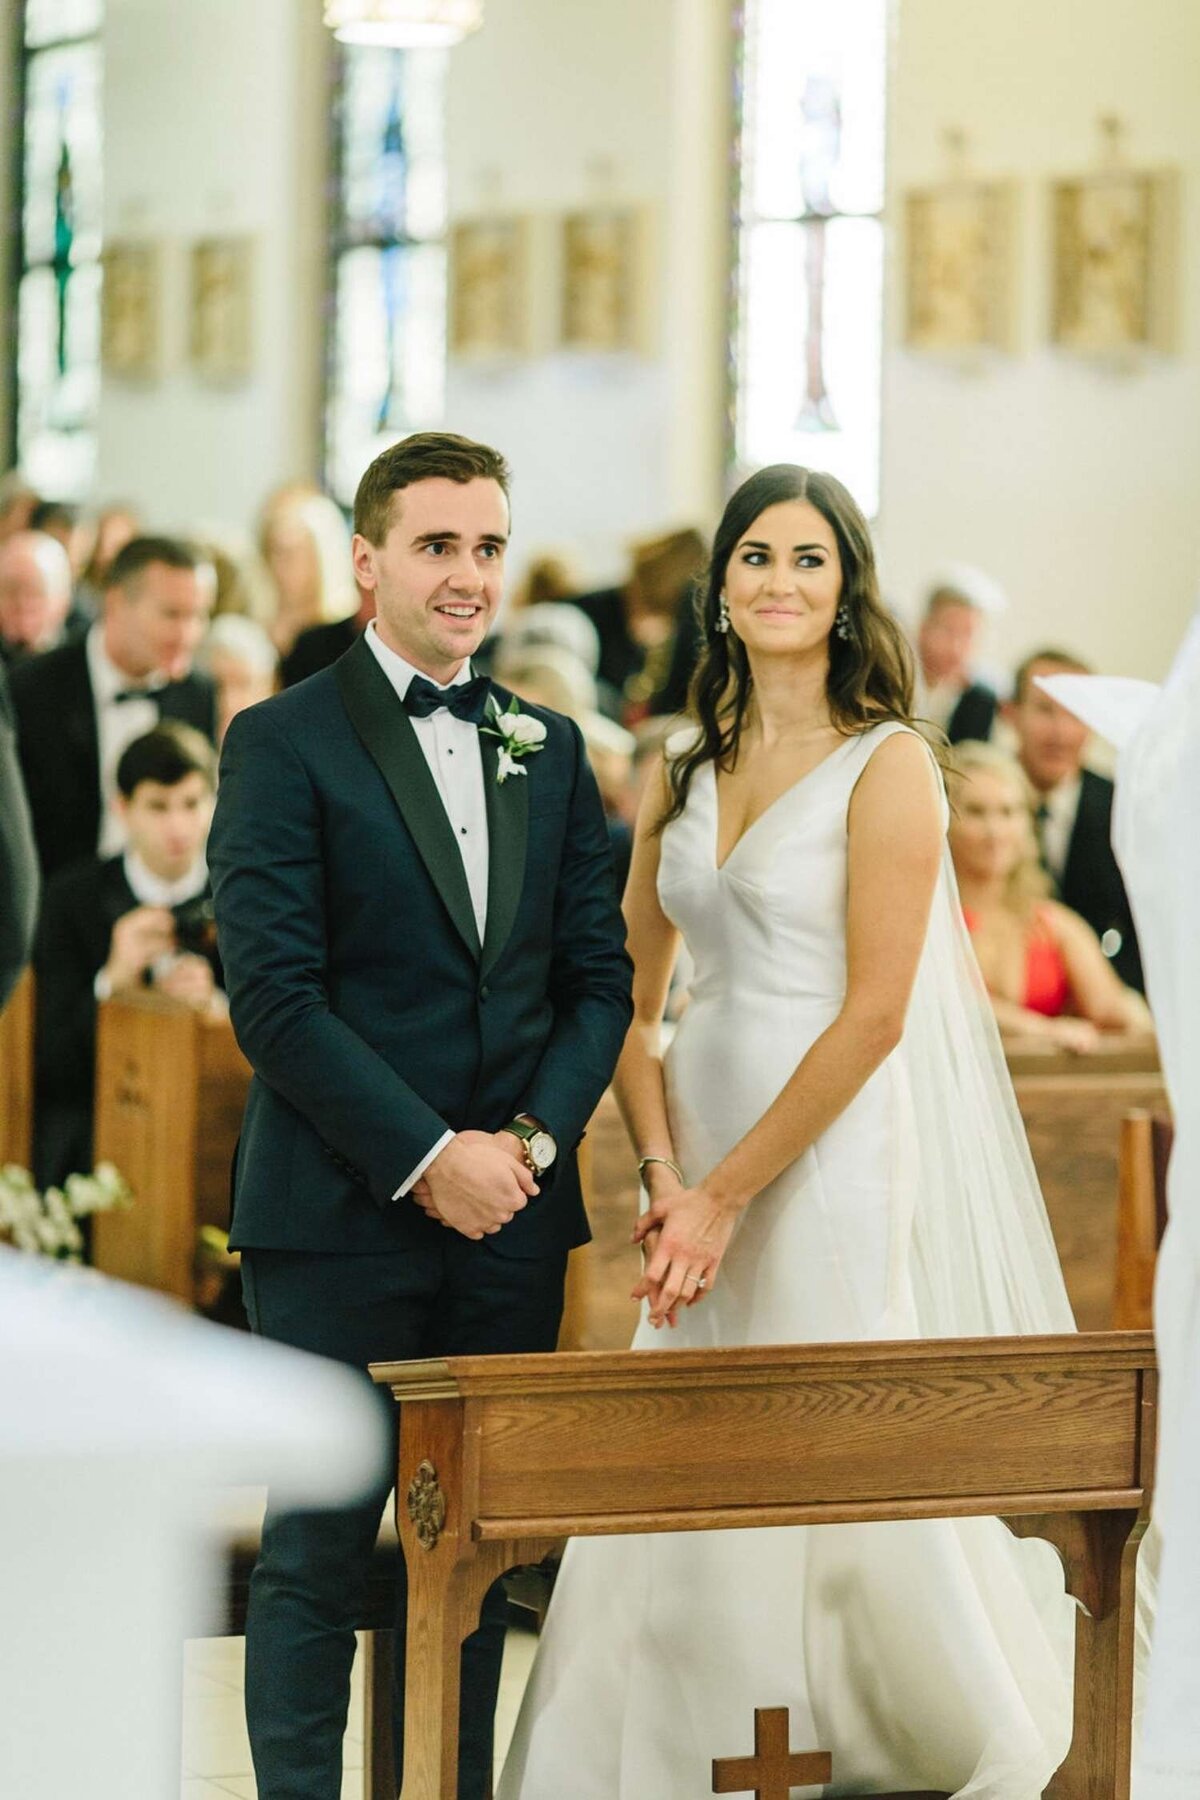 Classic and Timeless Church Wedding Ceremony for a Luxury Michigan Lakefront Golf Club Wedding.